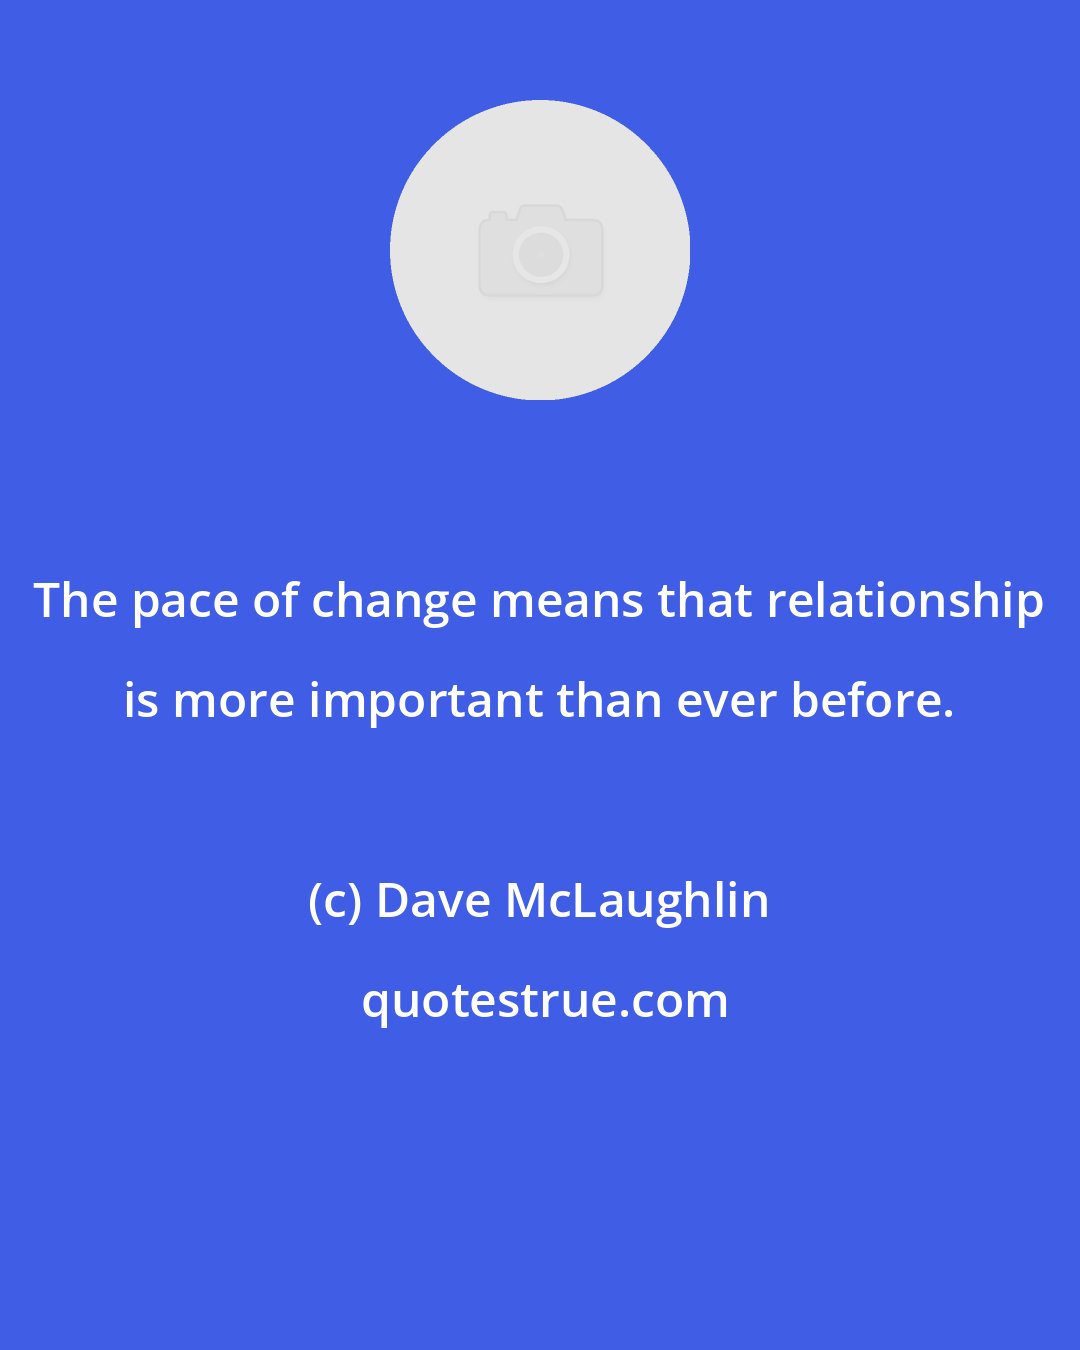 Dave McLaughlin: The pace of change means that relationship is more important than ever before.